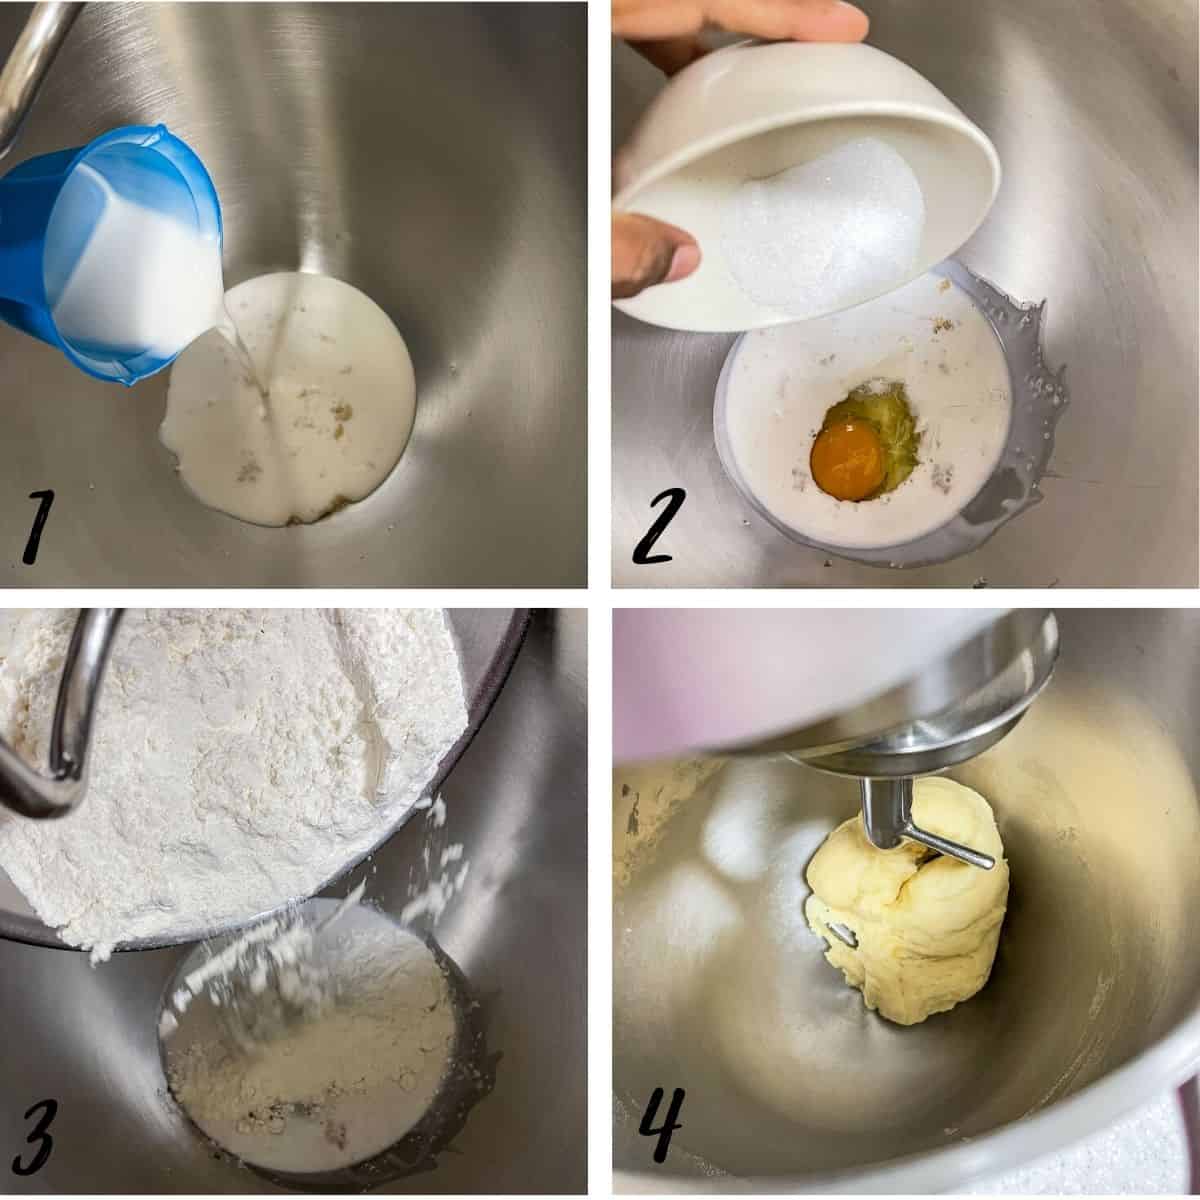 A poster of 4 images showing how to mix bread dough.